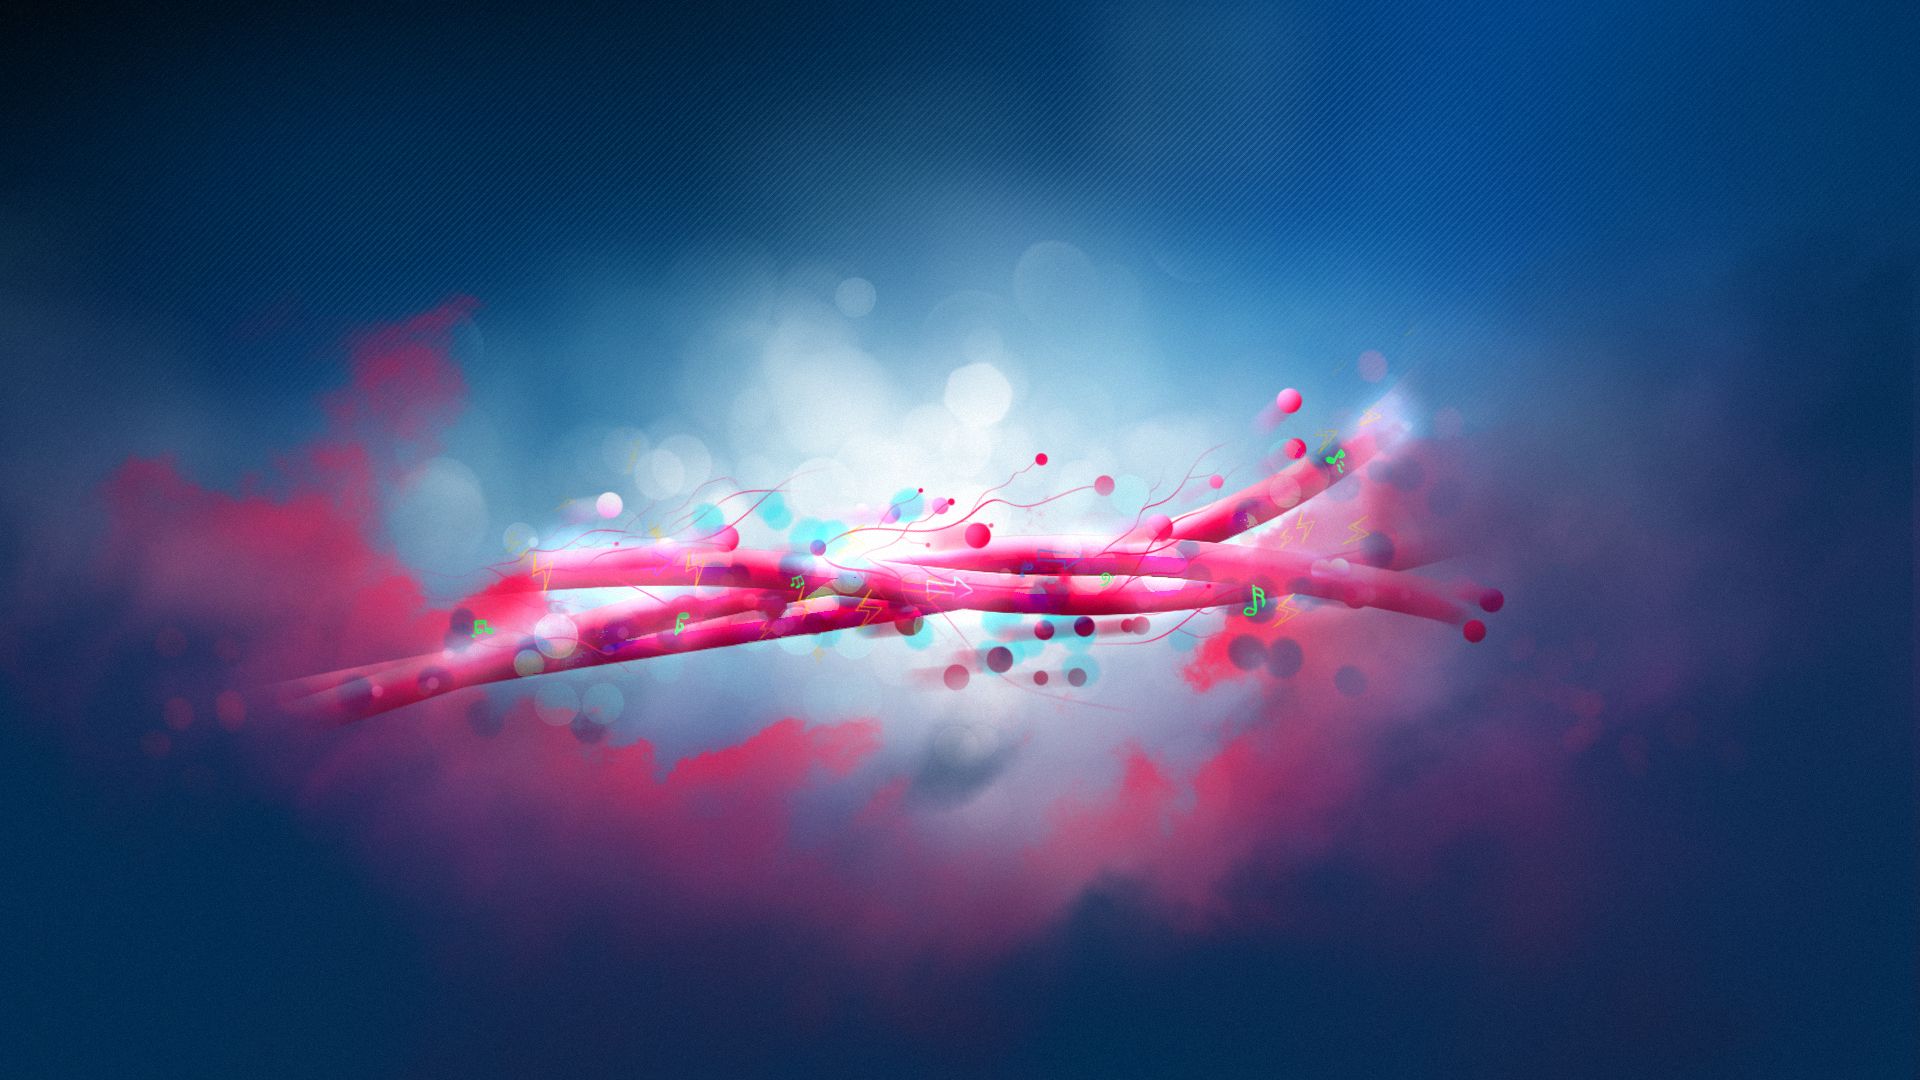 Abstract Wallpaper Full HD In